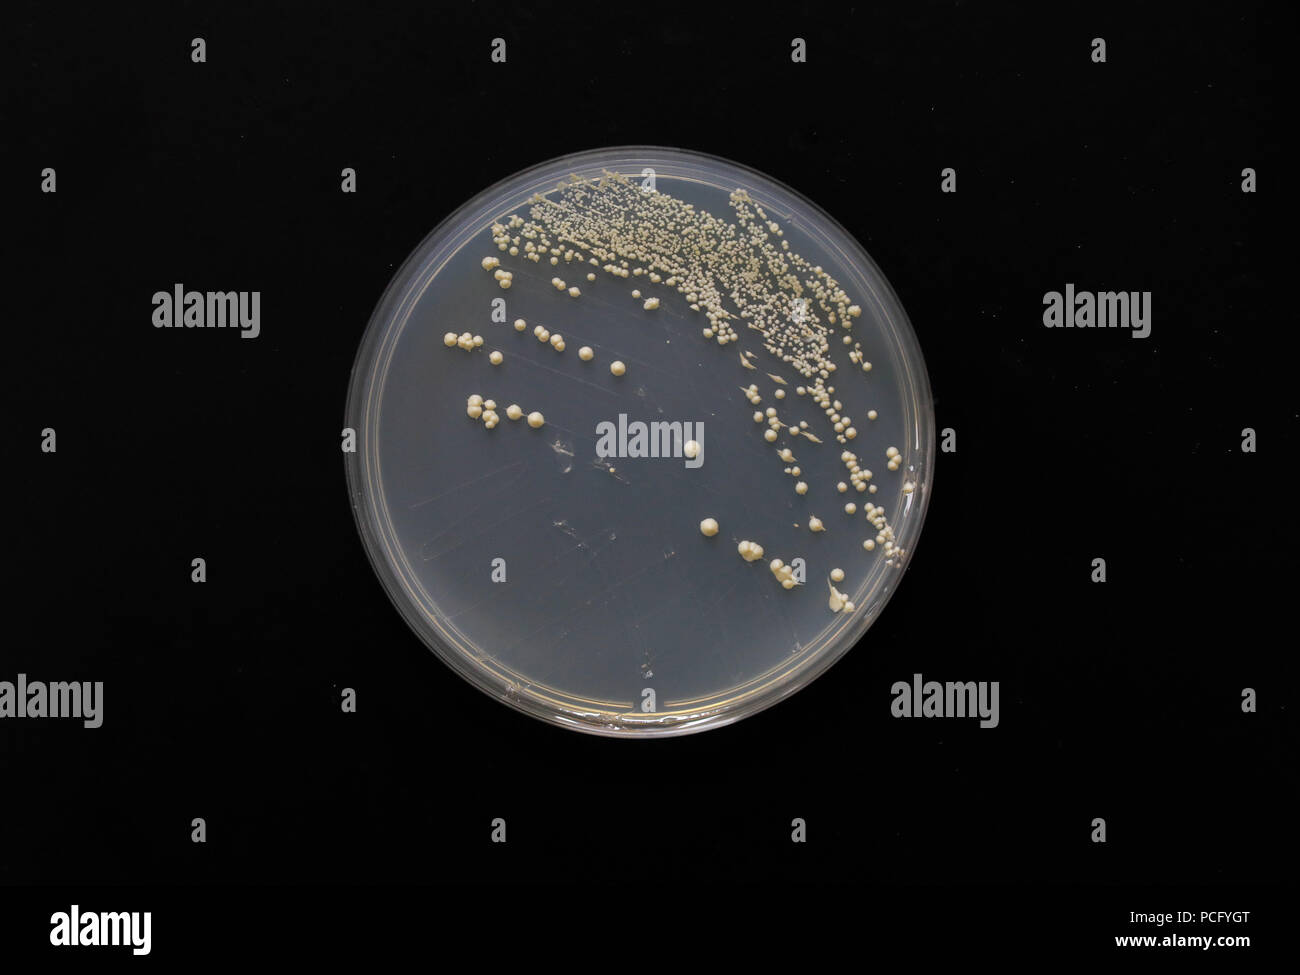 (180802) -- SHANGHAI, Aug. 2, 2018 (Xinhua) -- Photo taken on July 31, 2018 shows single chromosome yeast strain at the Center for Excellence in Molecular Plant Sciences, Shanghai Institute of Plant Physiology and Ecology, of Chinese Academy of Sciences in Shanghai, east China. Brewer's yeast, one-third of whose genome is said to share ancestry with a human's, has 16 chromosomes. However, Chinese scientists have managed to fit nearly all its genetic material into just one chromosome while not affecting the majority of its functions, according to a paper released Thursday on Nature's website. Q Stock Photo